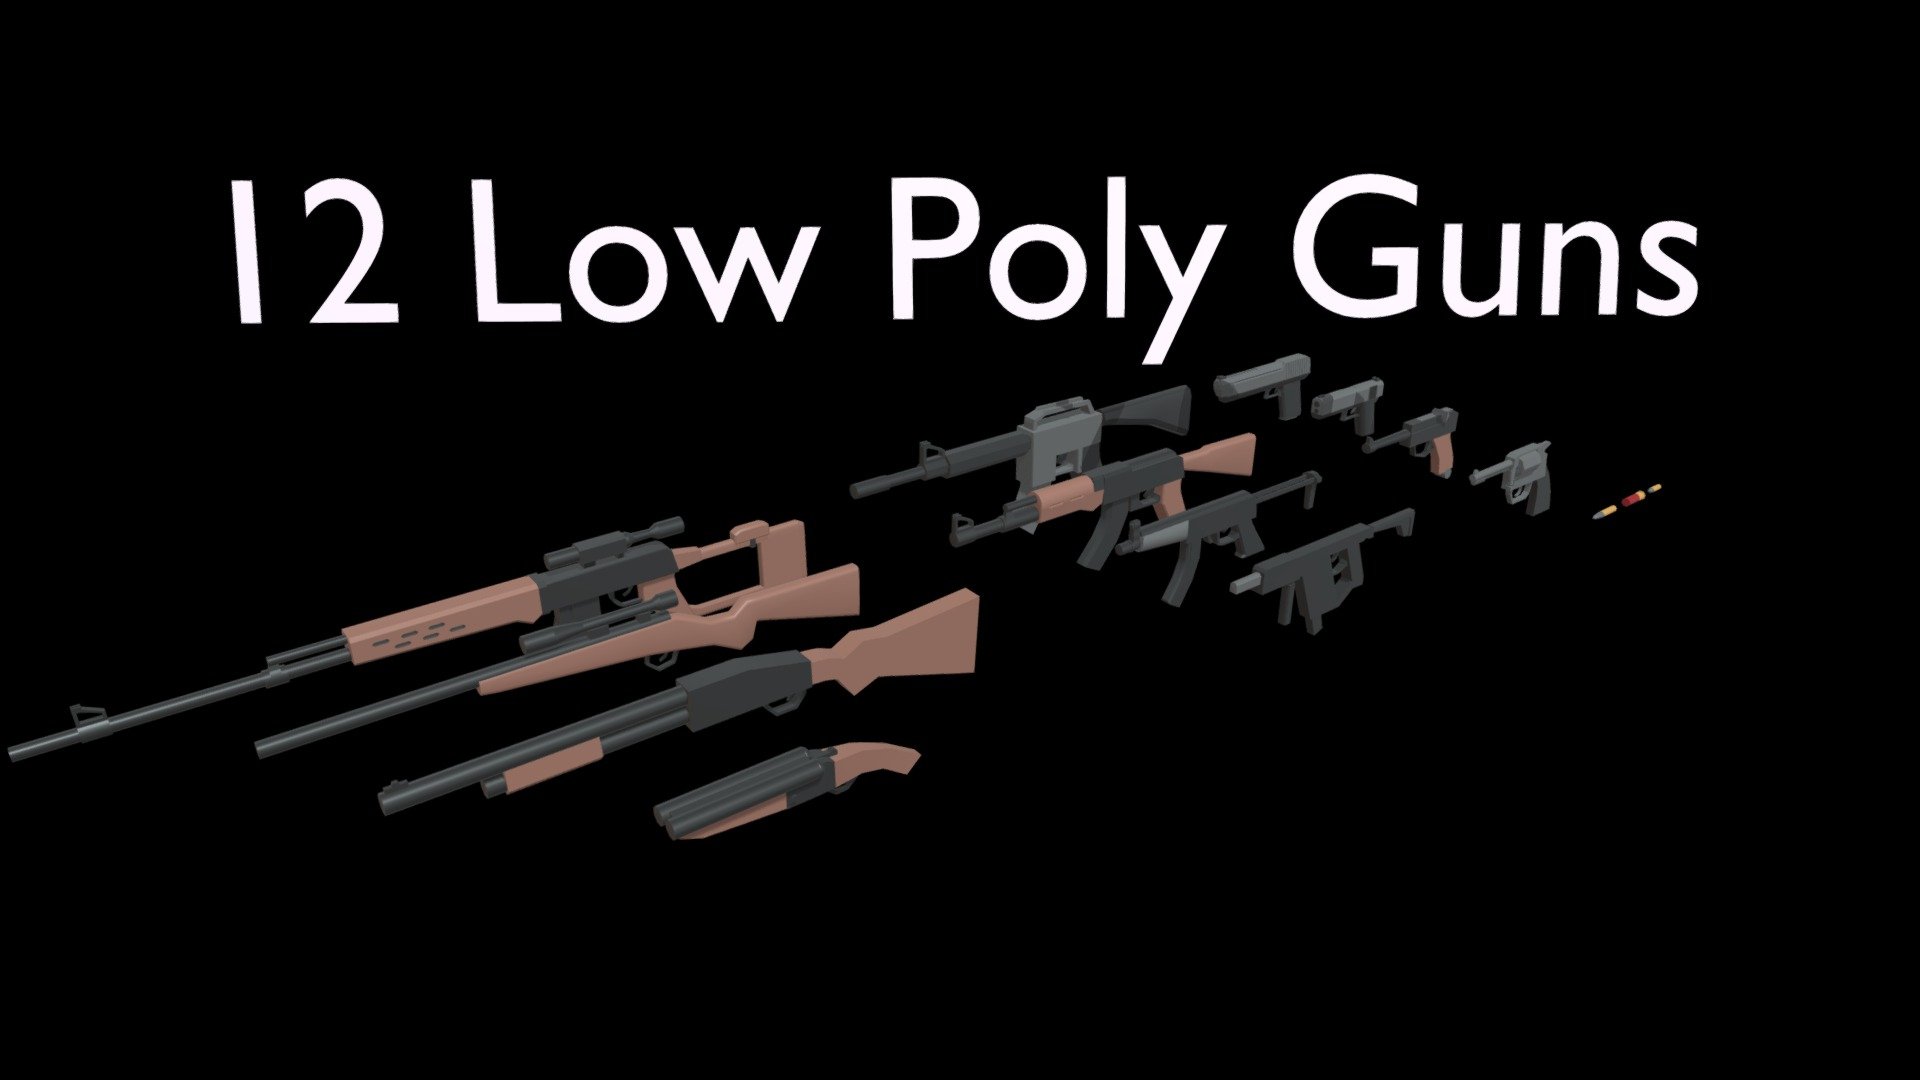 12 Low Poly Guns.

10K Tris approximately.

800 Tris per model approximately.

Simple Low Poly Guns with single shaded colour per material which makes it easy to change colour attributes and modify material property.

Parts of the model like magazine and trigger are separate from the body which makes it easy to animate 3d model